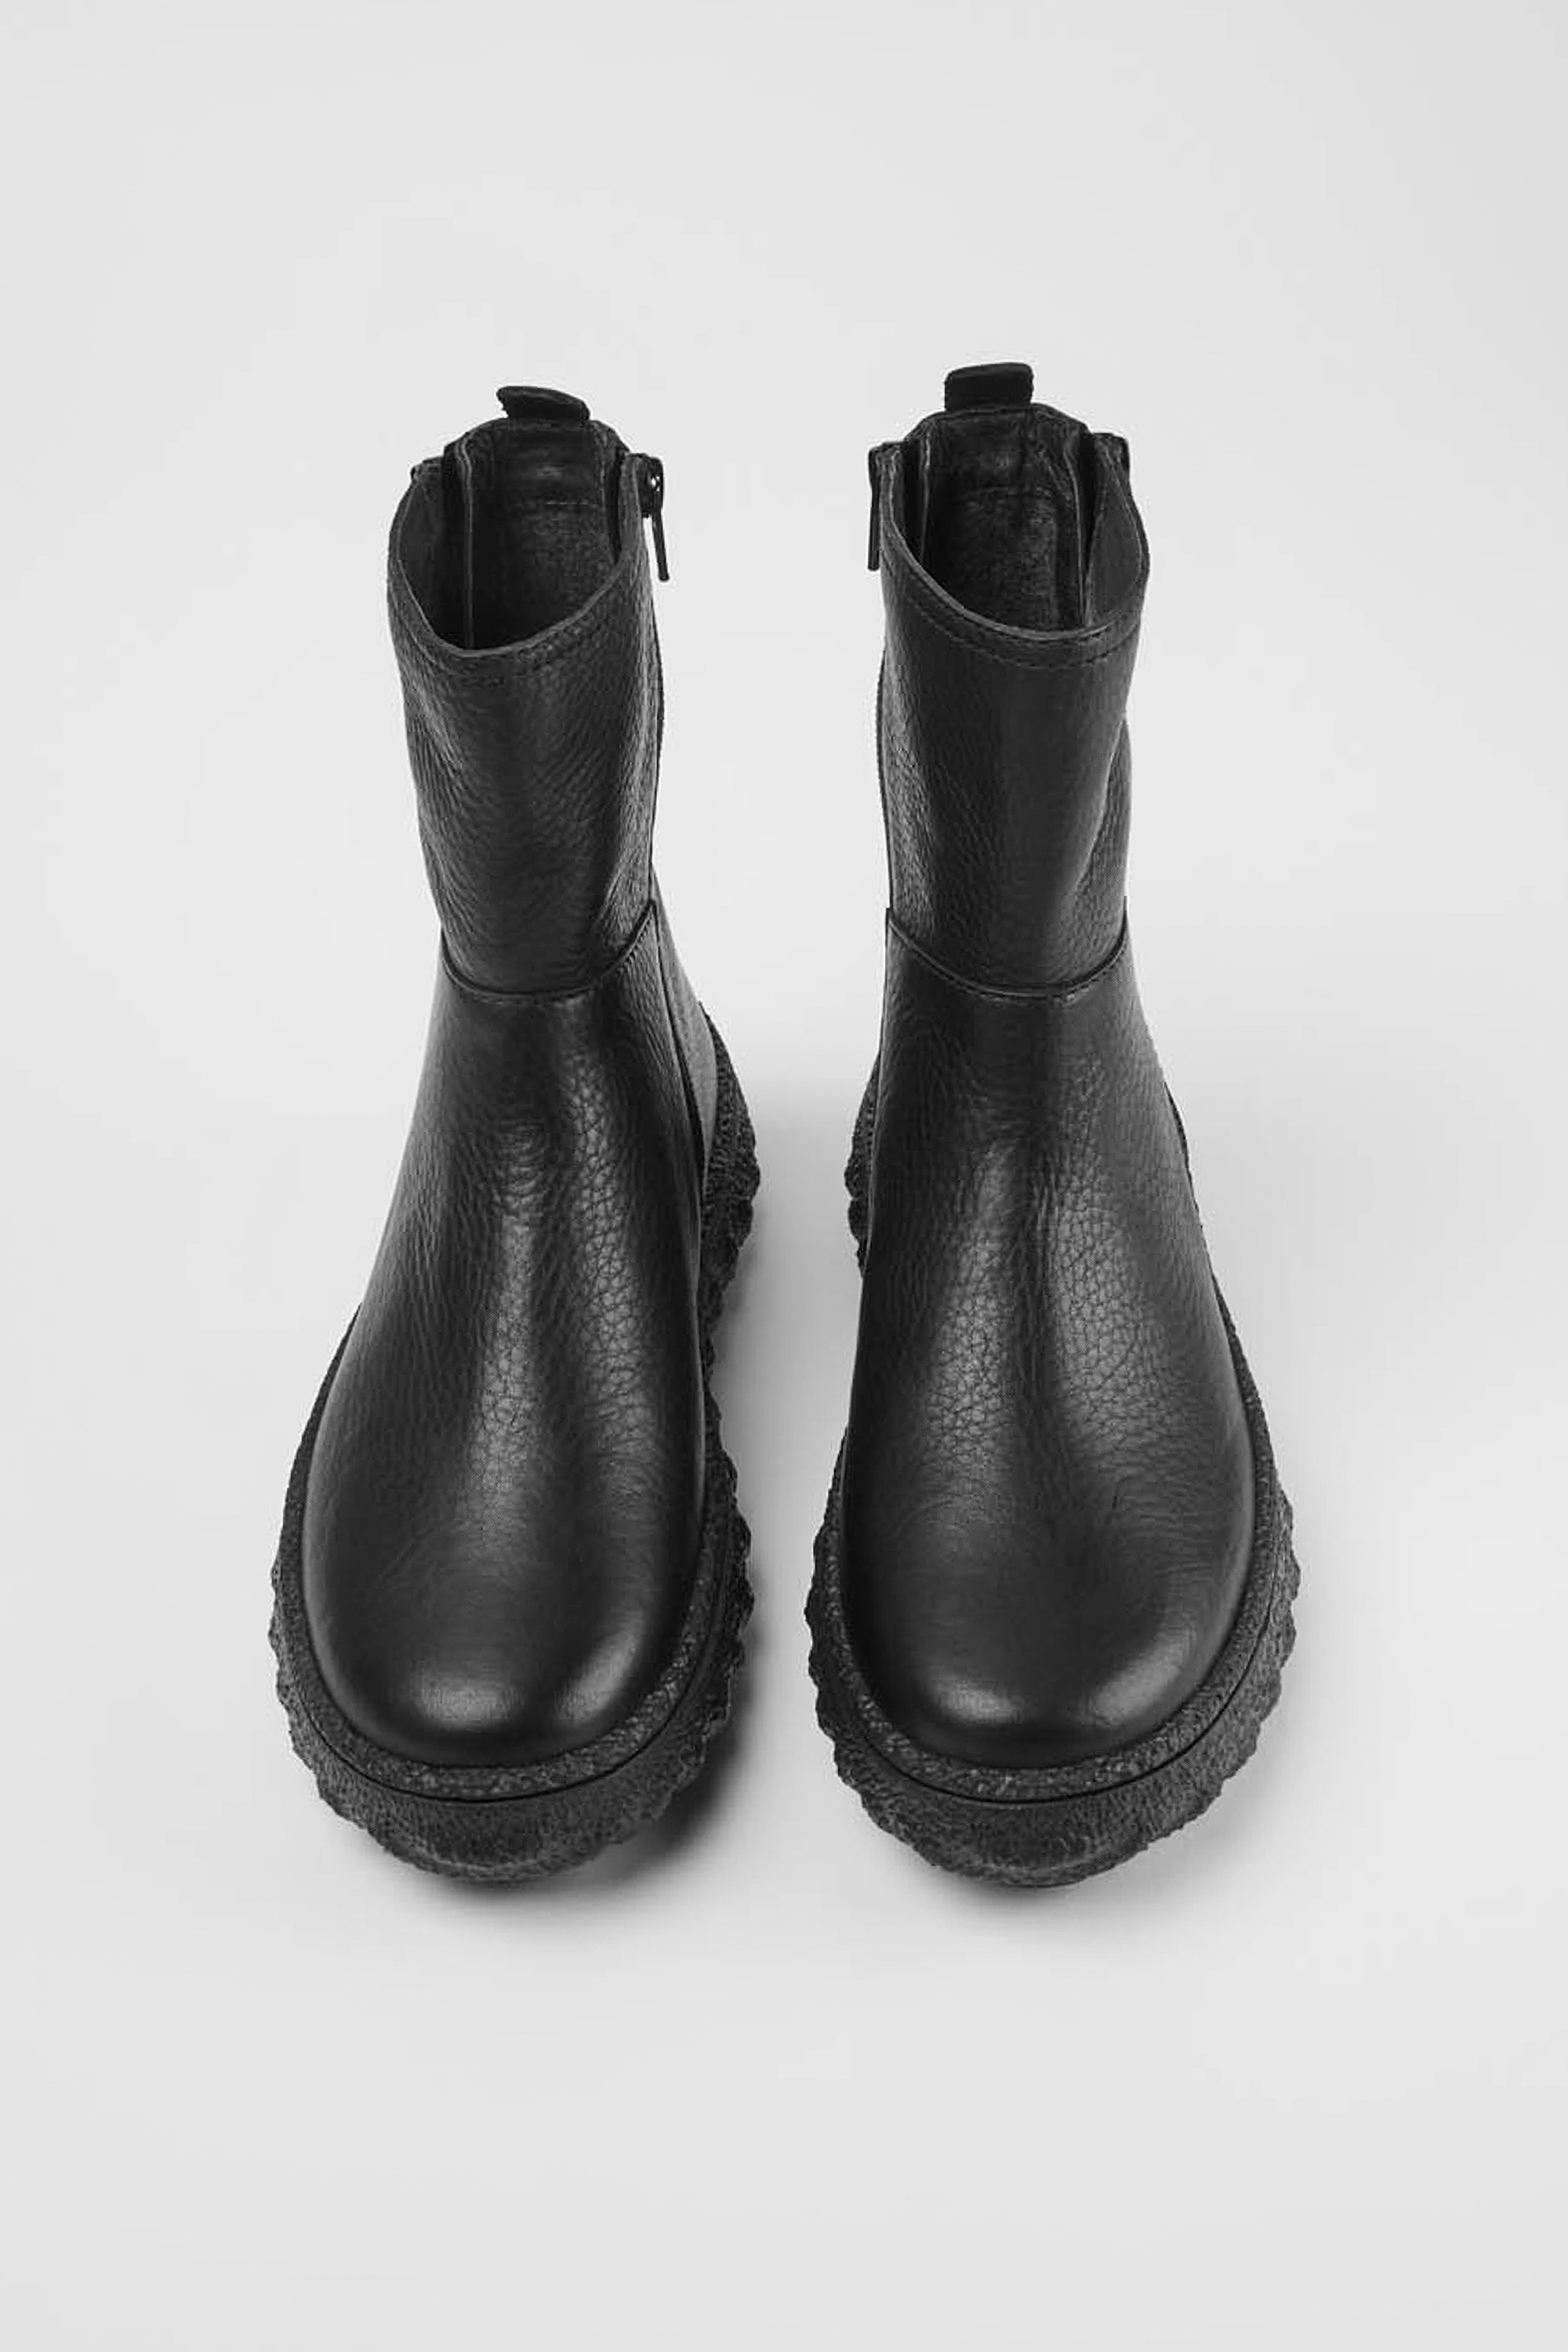 Ground Black Boots for Women - Spring/Summer collection - Camper USA